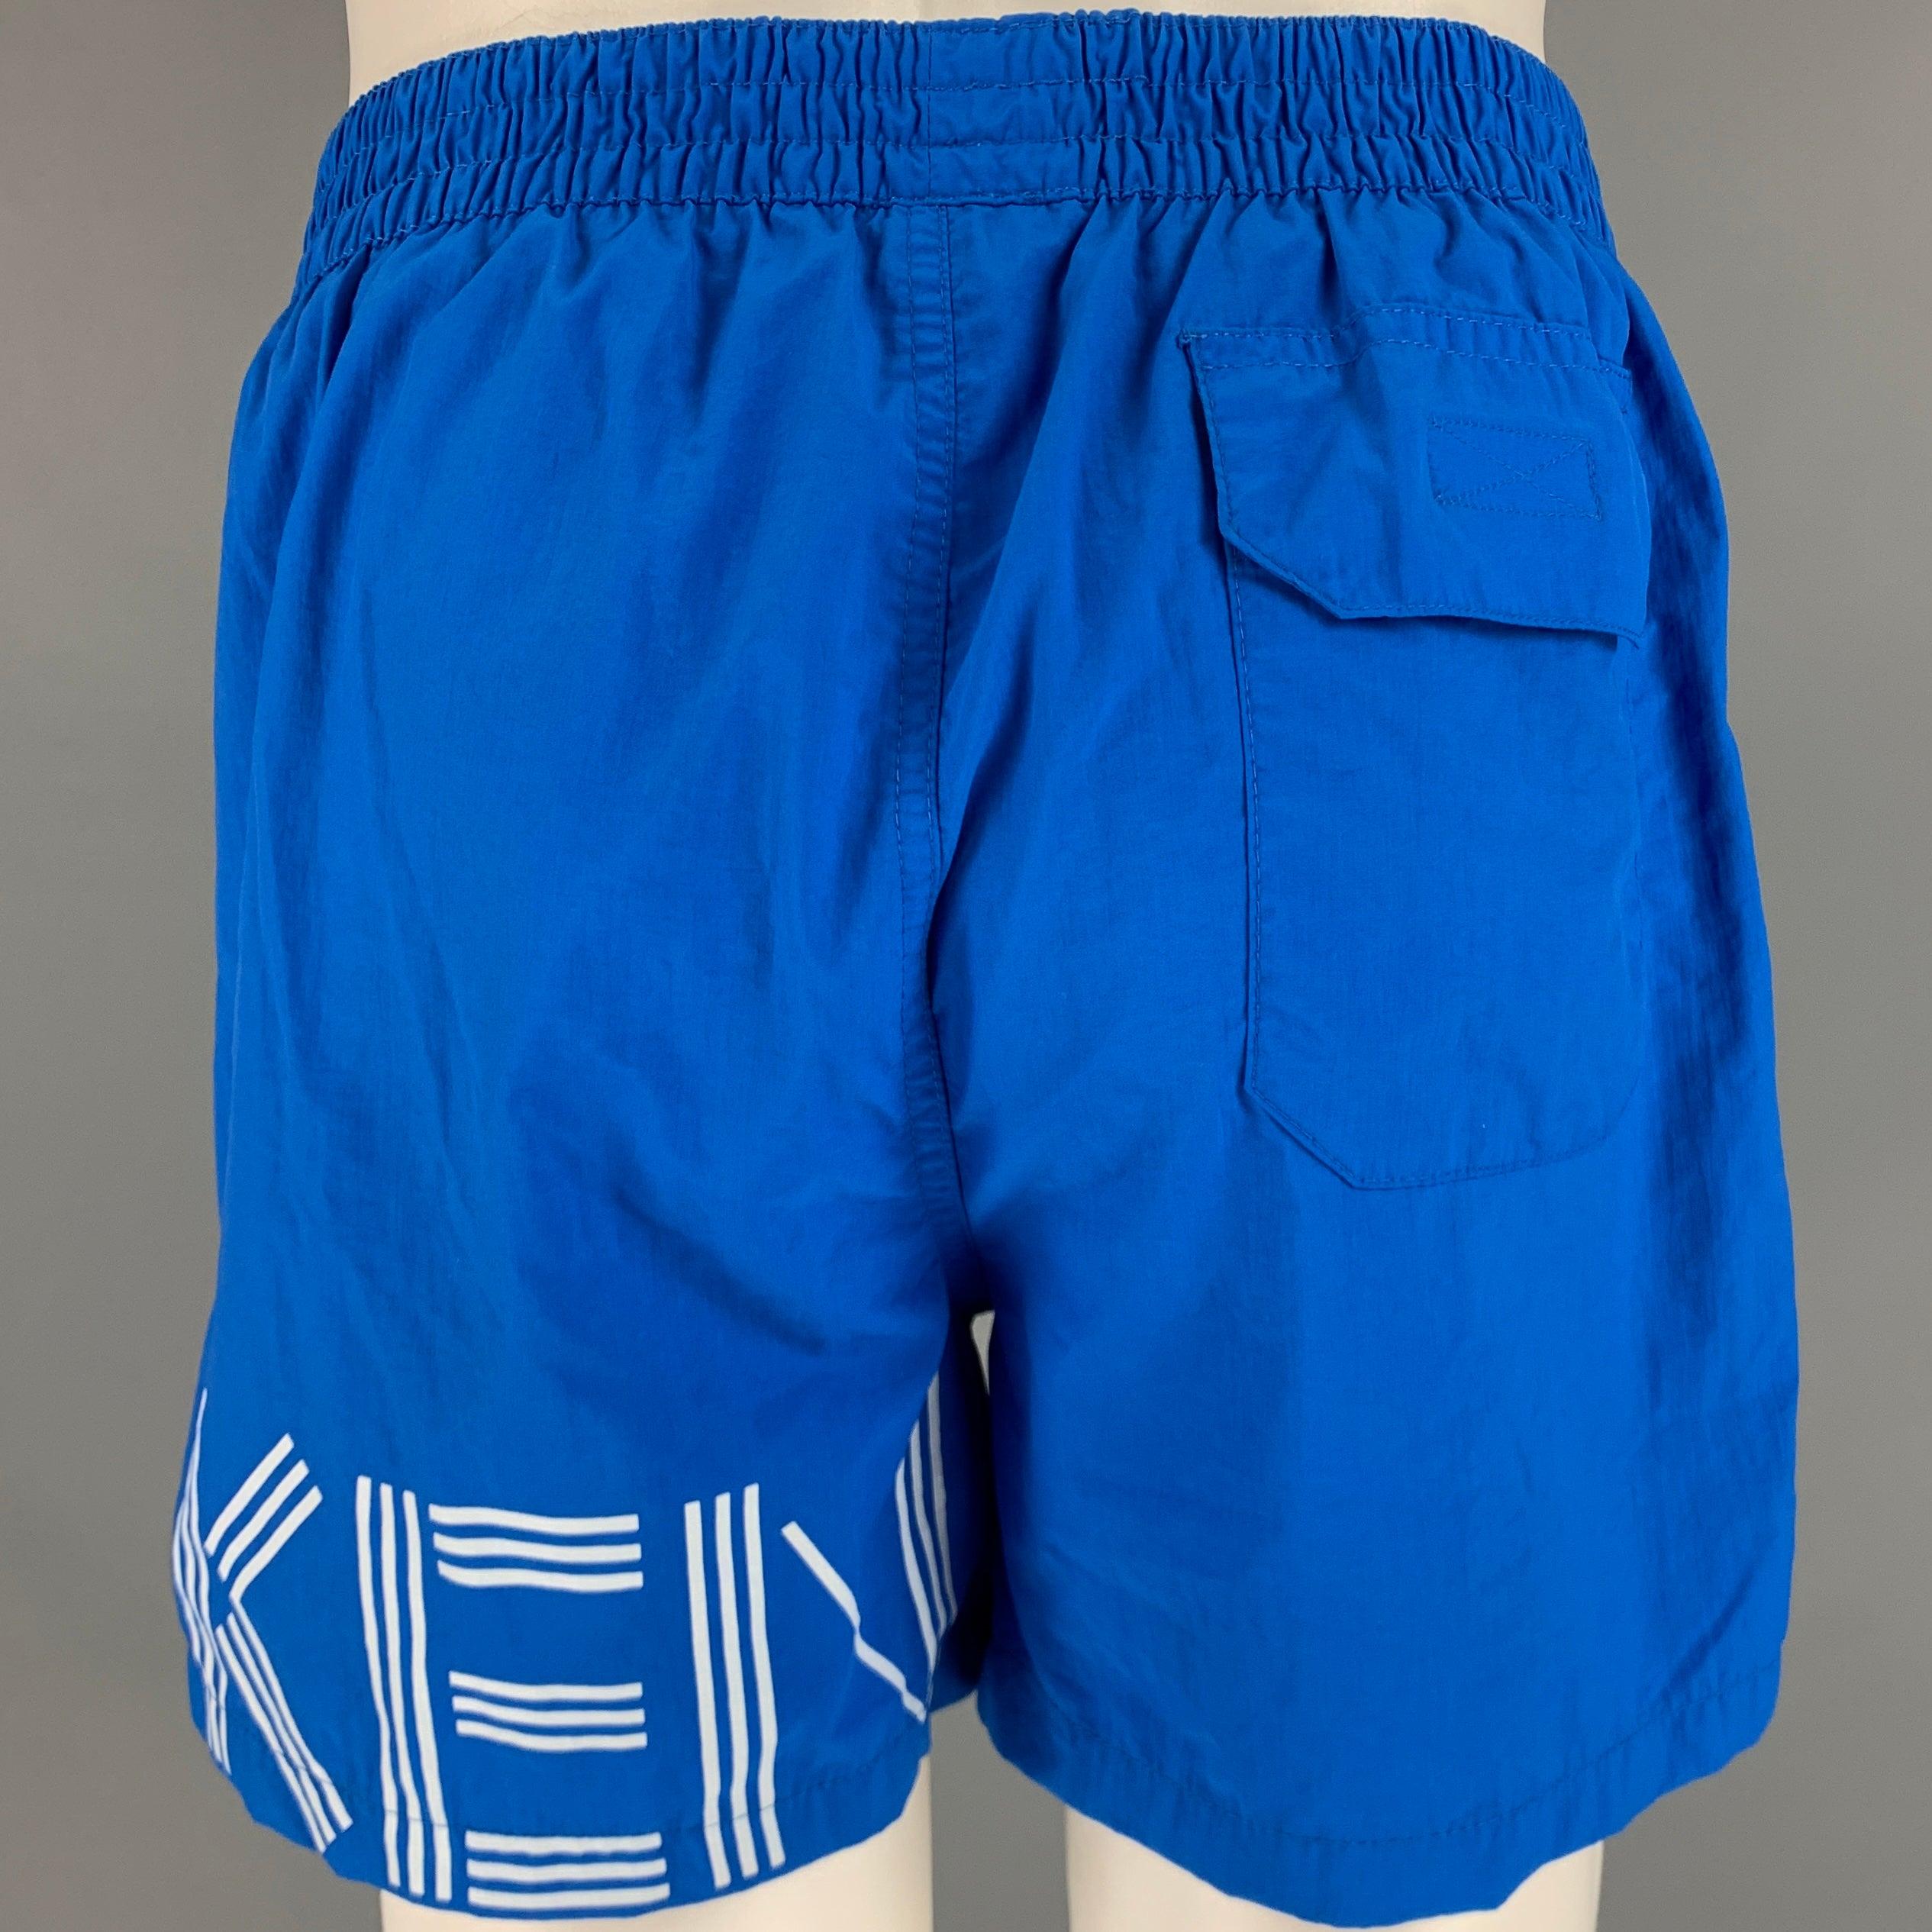 KENZO swim trunks in a
blue and white nylon fabric featuring signature logo wrapping around left thigh, two pockets, and elastic waistband.Excellent Pre-Owned Condition. 

Marked:   M 

Measurements: 
  Waist: 29 inches Rise: 9.5 inches Inseam: 4